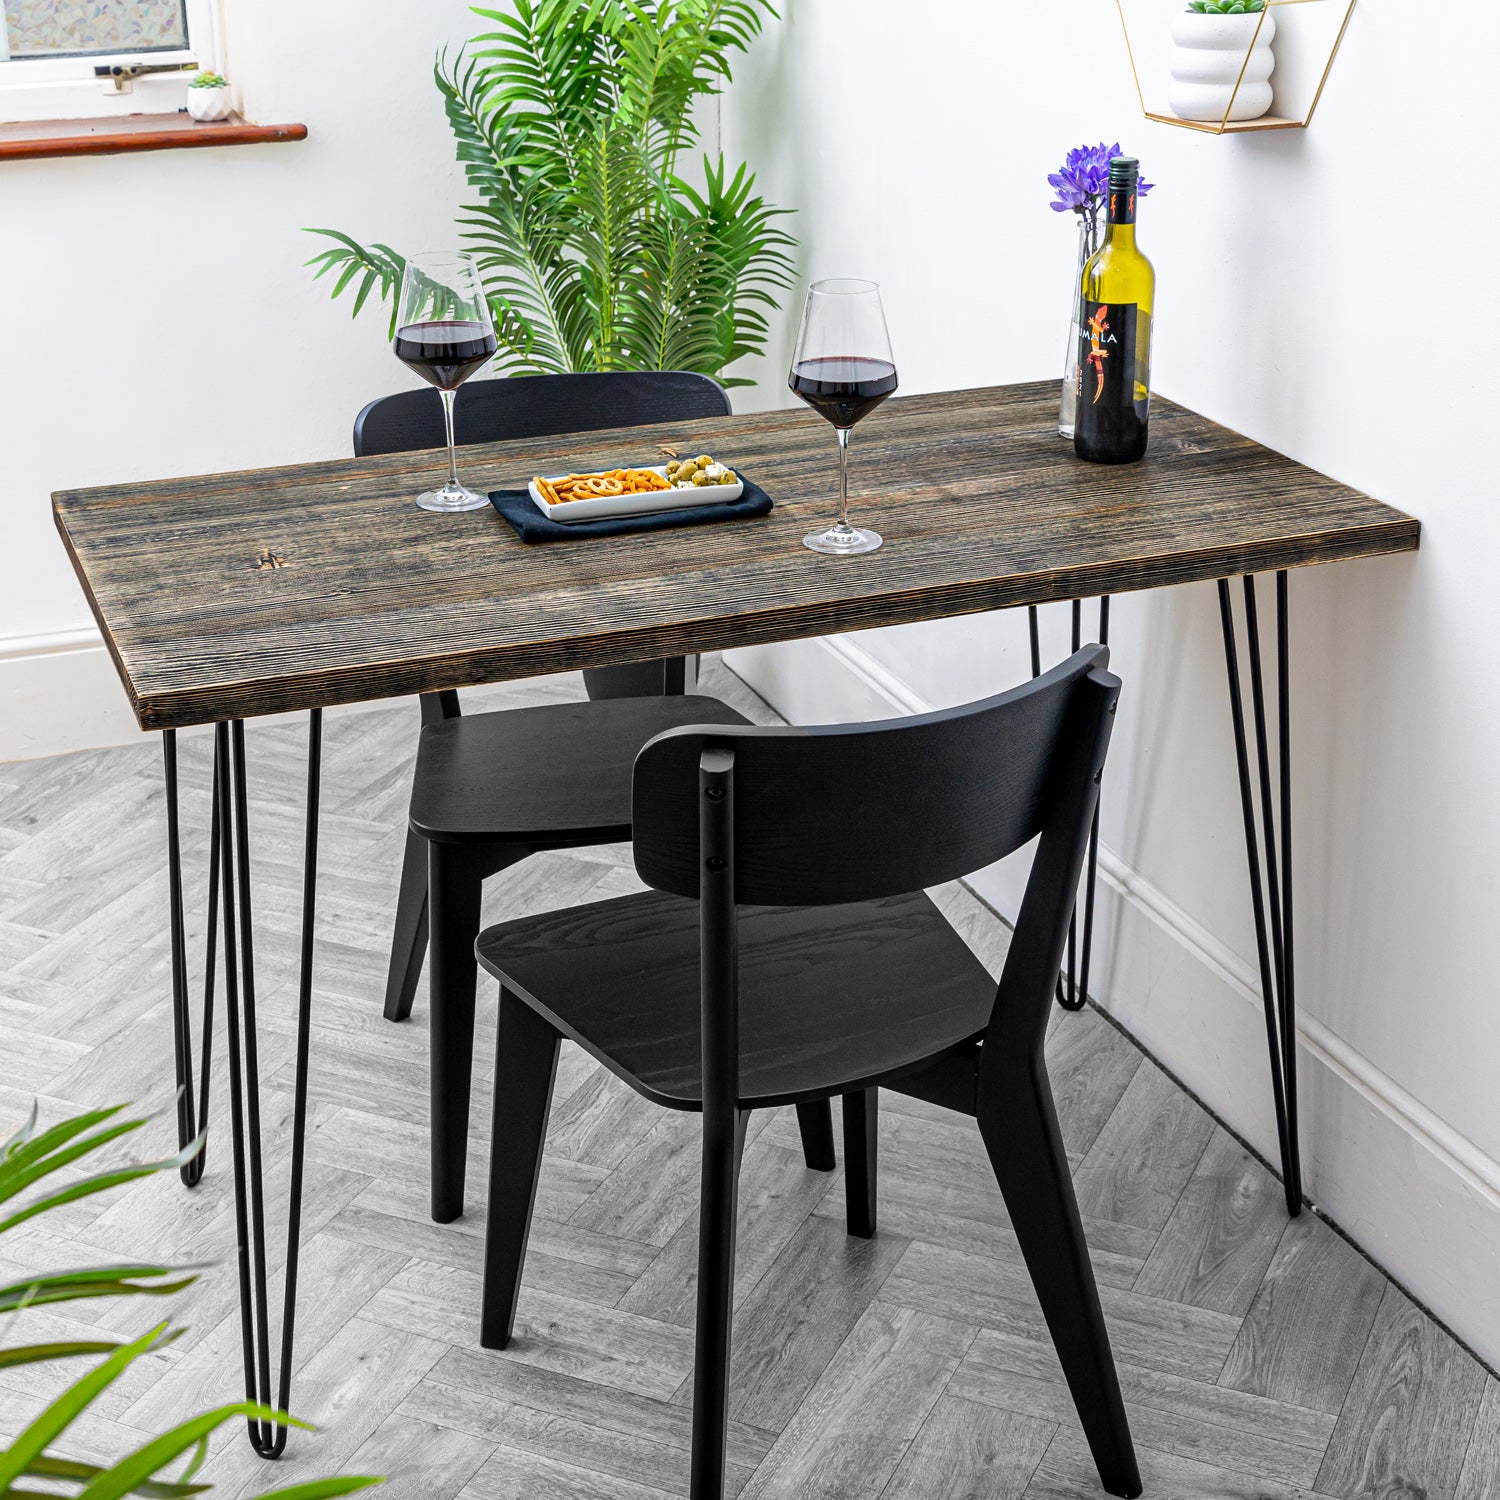 Dark Wood Table with Black Hairpin Legs